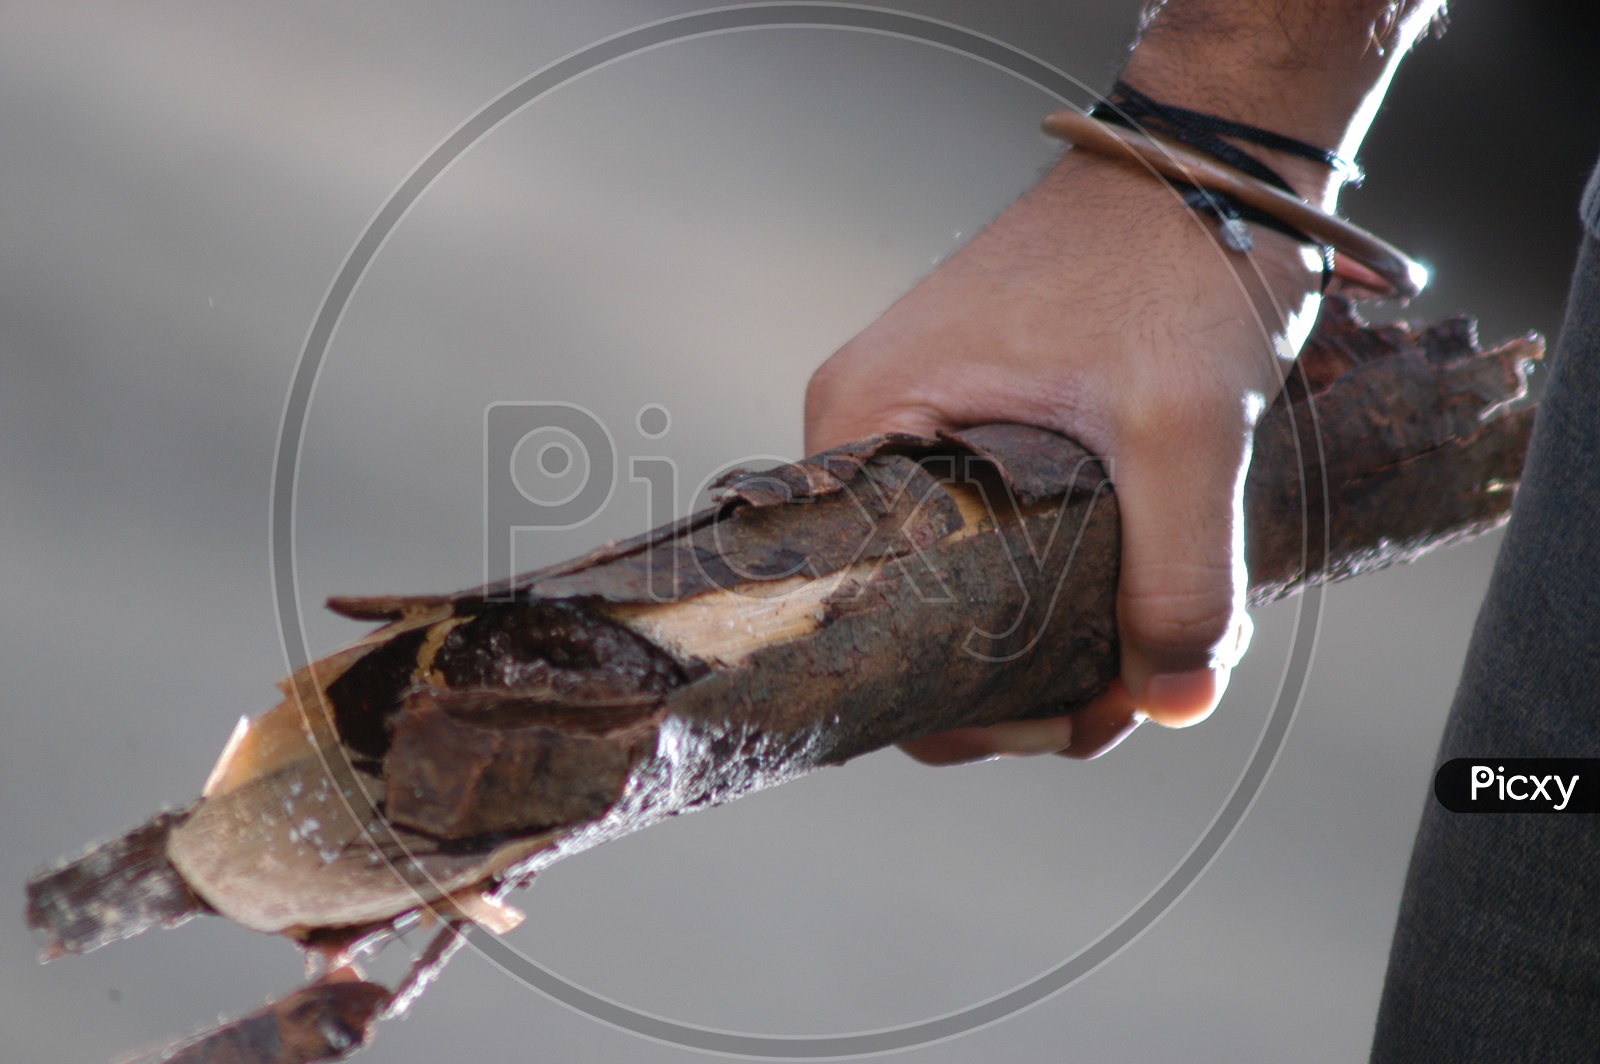 Man Holding Wooden Stick In Hand Closeup